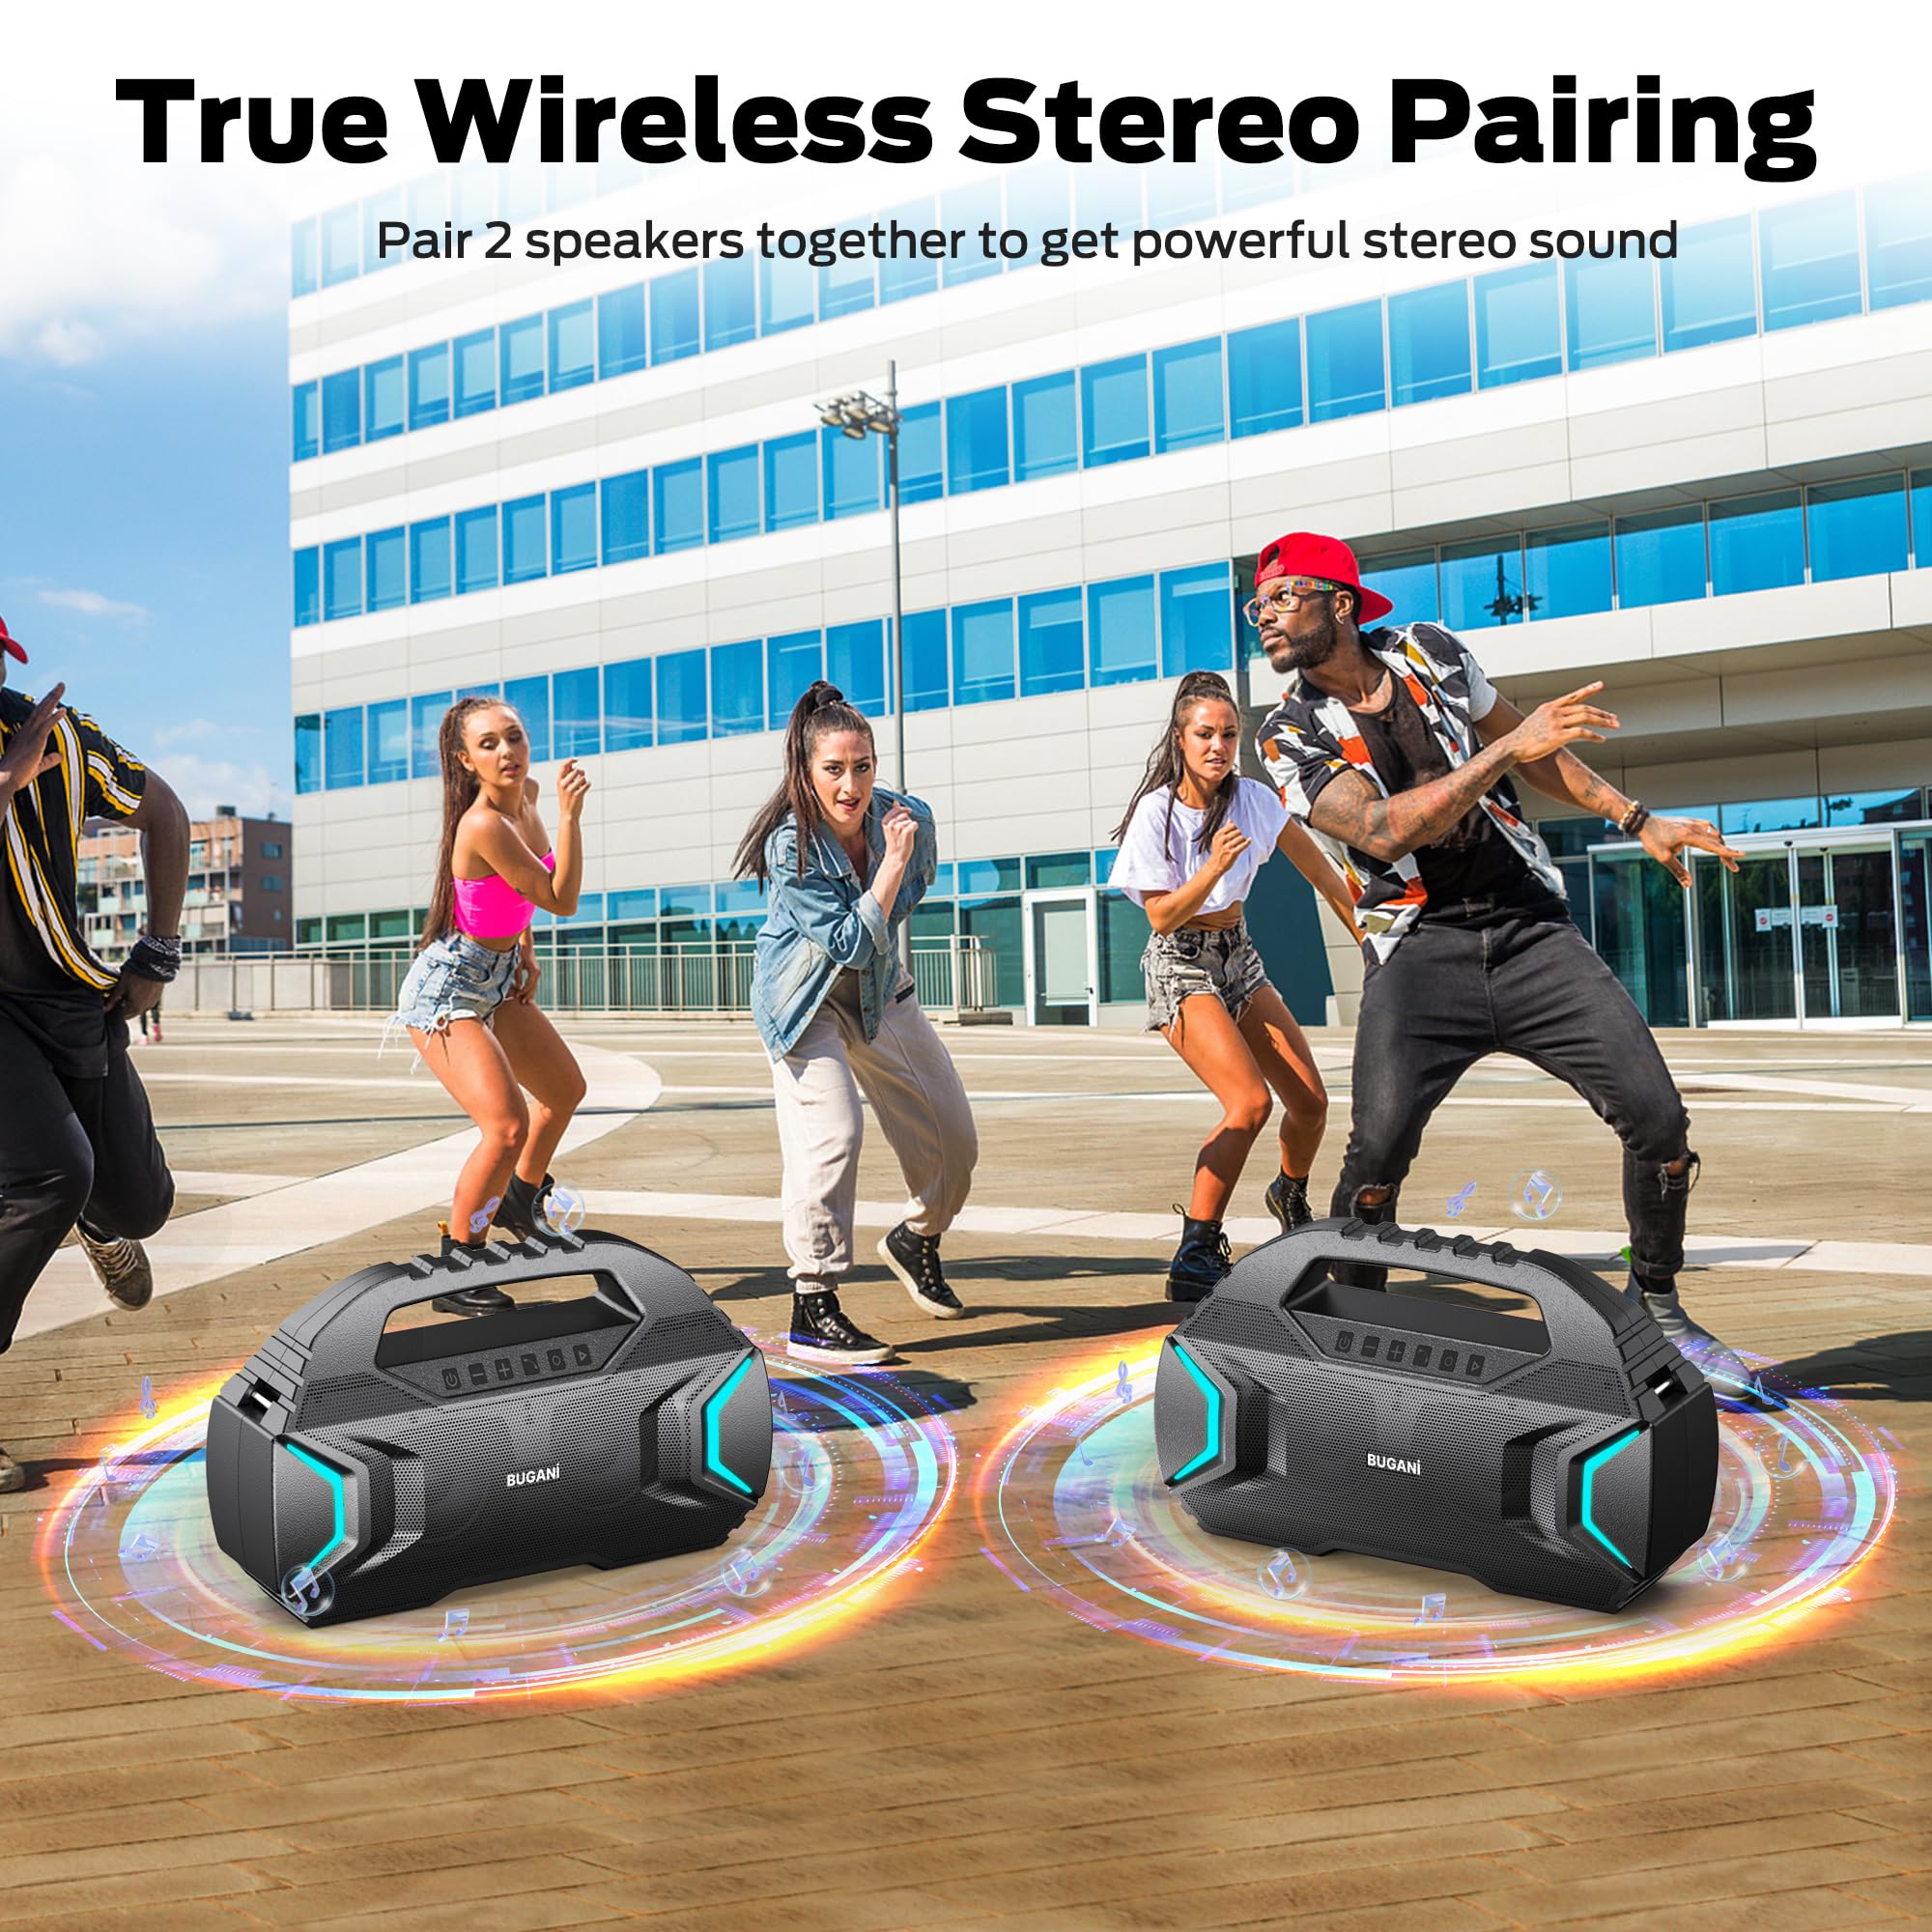 BUGANI Bluetooth Speakers, Party Plus Wireless Portable Speaker with 60W Big Power Dual Pairing True Wireless Stereo Sound, 30H Playtime, Support TF/AUX/USB, Suitable for Party, Outdoor Speaker